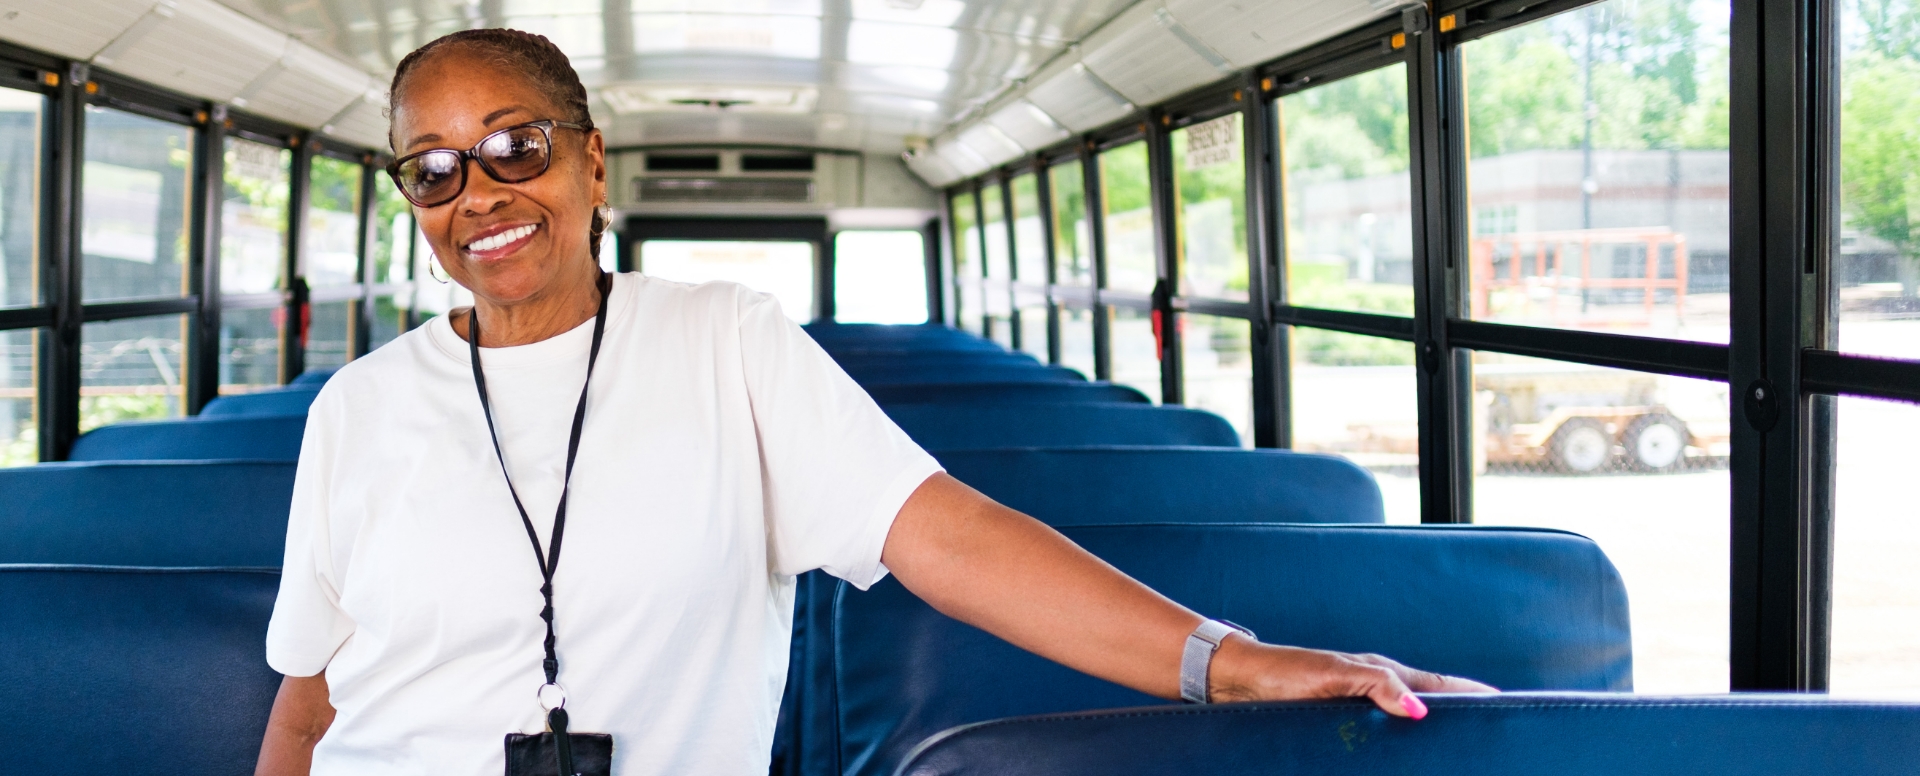 A Wake County Public School bus safety assistant smiling on the job.